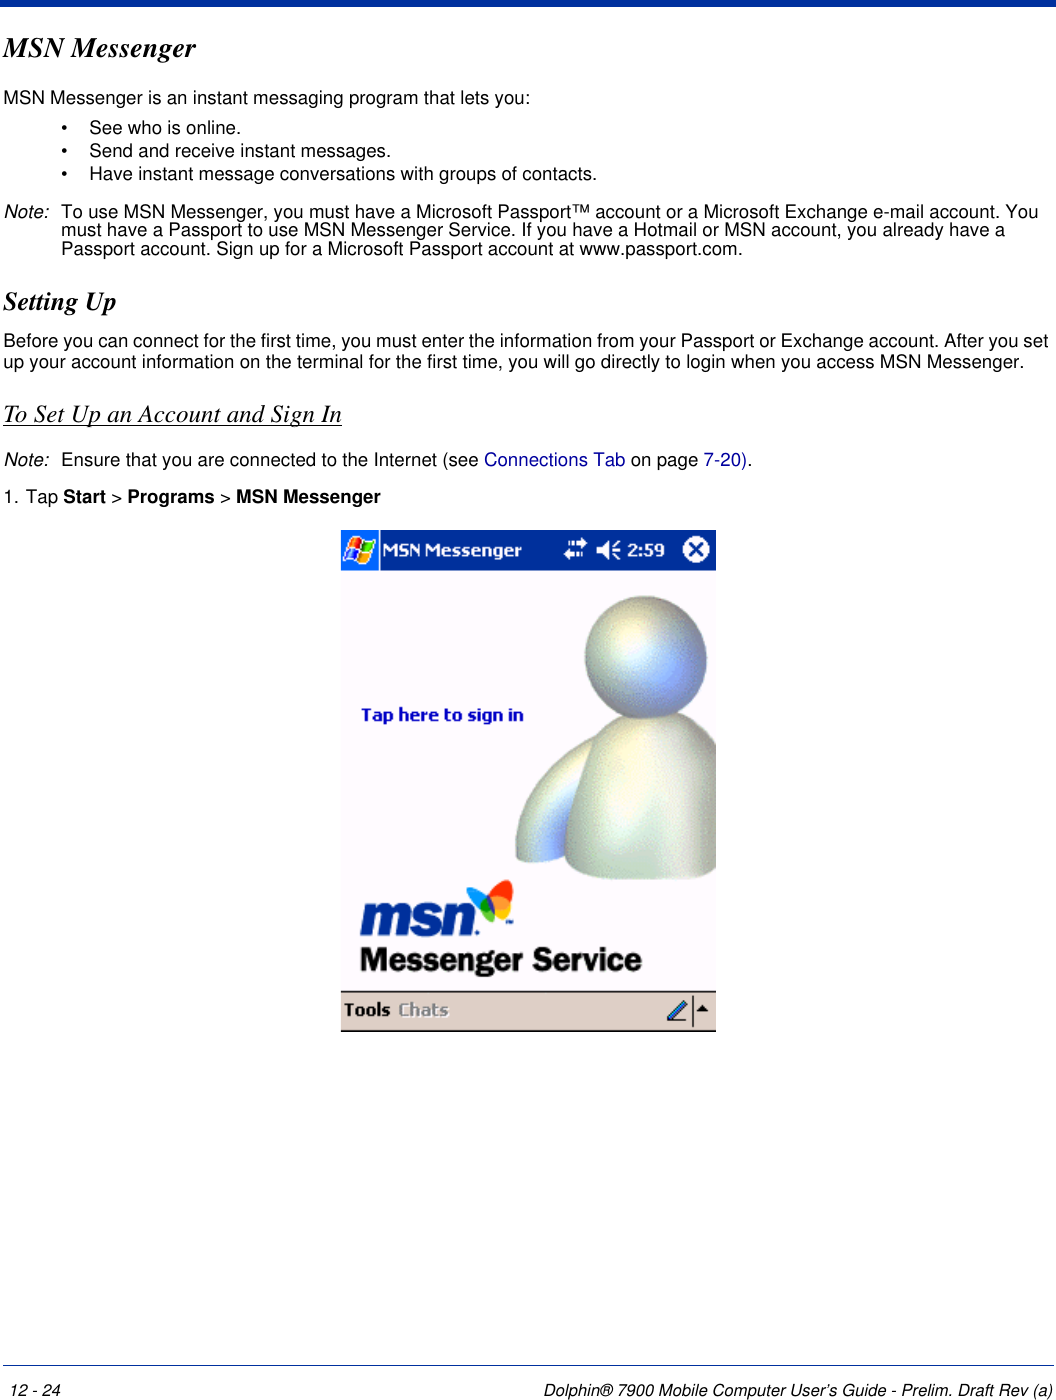 12 - 24 Dolphin® 7900 Mobile Computer User’s Guide - Prelim. Draft Rev (a)MSN MessengerMSN Messenger is an instant messaging program that lets you:•             See who is online.•             Send and receive instant messages.•             Have instant message conversations with groups of contacts.Note: To use MSN Messenger, you must have a Microsoft Passport™ account or a Microsoft Exchange e-mail account. You must have a Passport to use MSN Messenger Service. If you have a Hotmail or MSN account, you already have a Passport account. Sign up for a Microsoft Passport account at www.passport.com. Setting Up Before you can connect for the first time, you must enter the information from your Passport or Exchange account. After you set up your account information on the terminal for the first time, you will go directly to login when you access MSN Messenger.To Set Up an Account and Sign InNote: Ensure that you are connected to the Internet (see Connections Tab on page 7-20).1. Tap Start &gt; Programs &gt; MSN Messenger